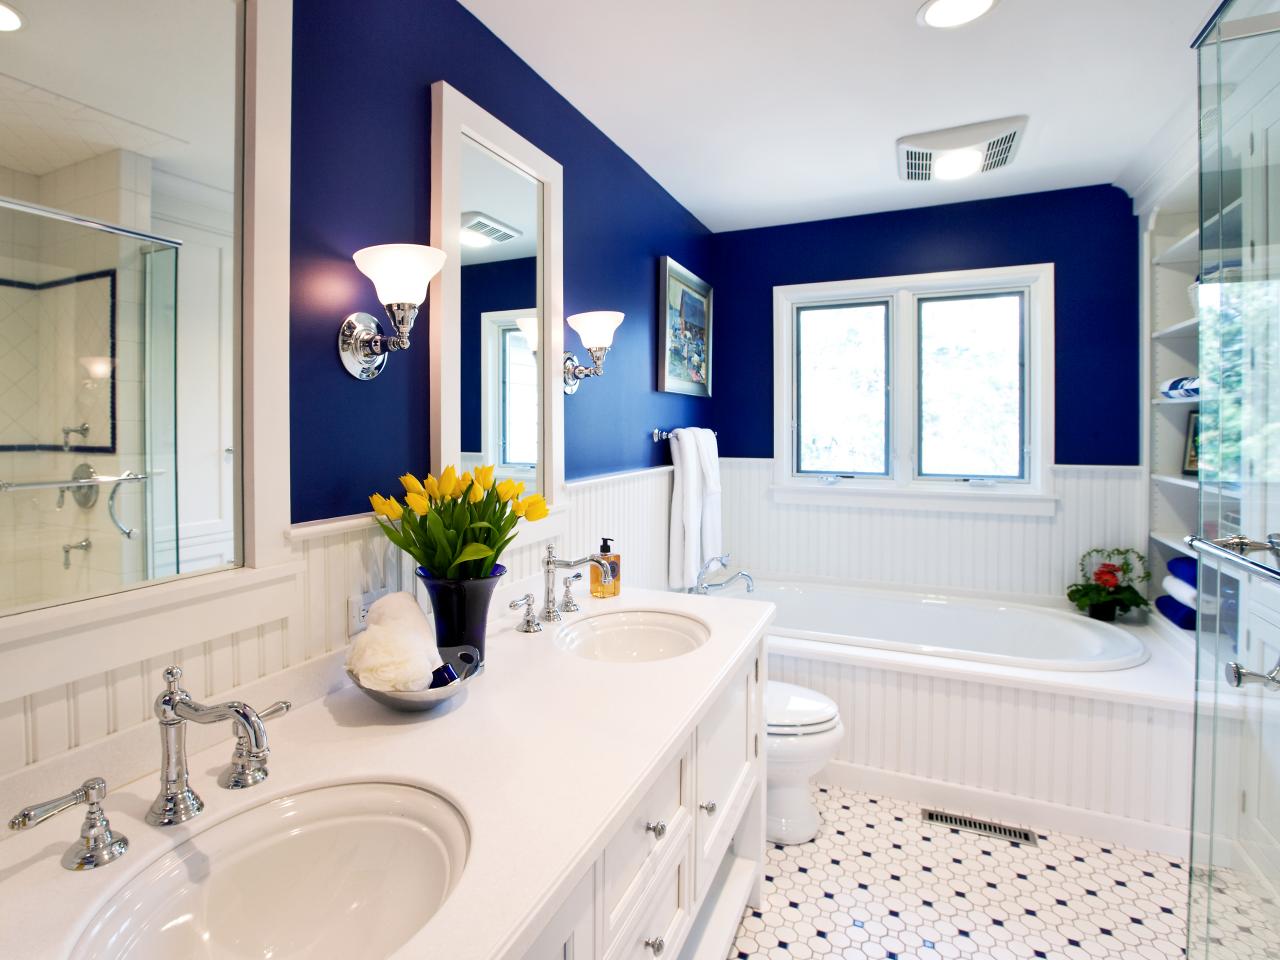 Traditional elements paired with contrasting colors are perfect for this style. Source: HGTV